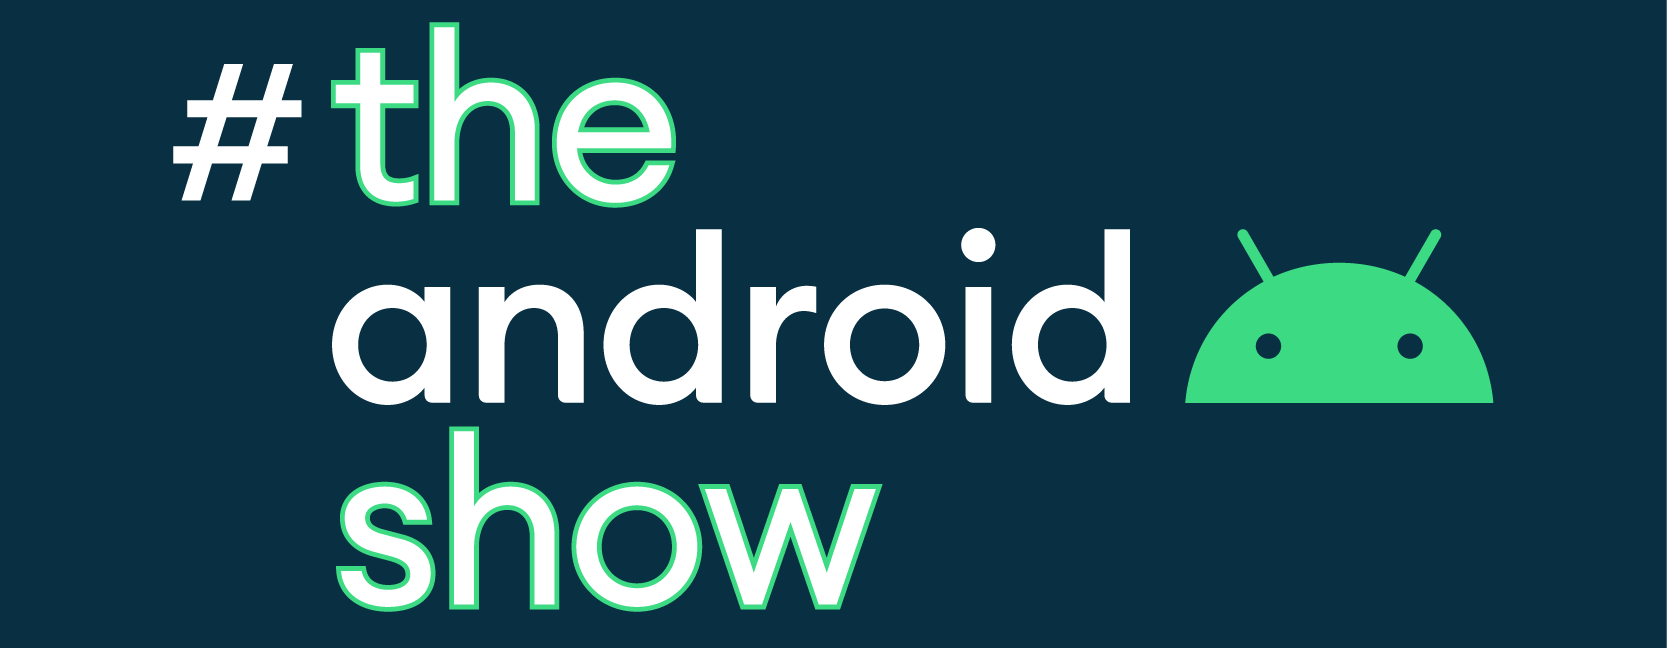 Android Show 로고